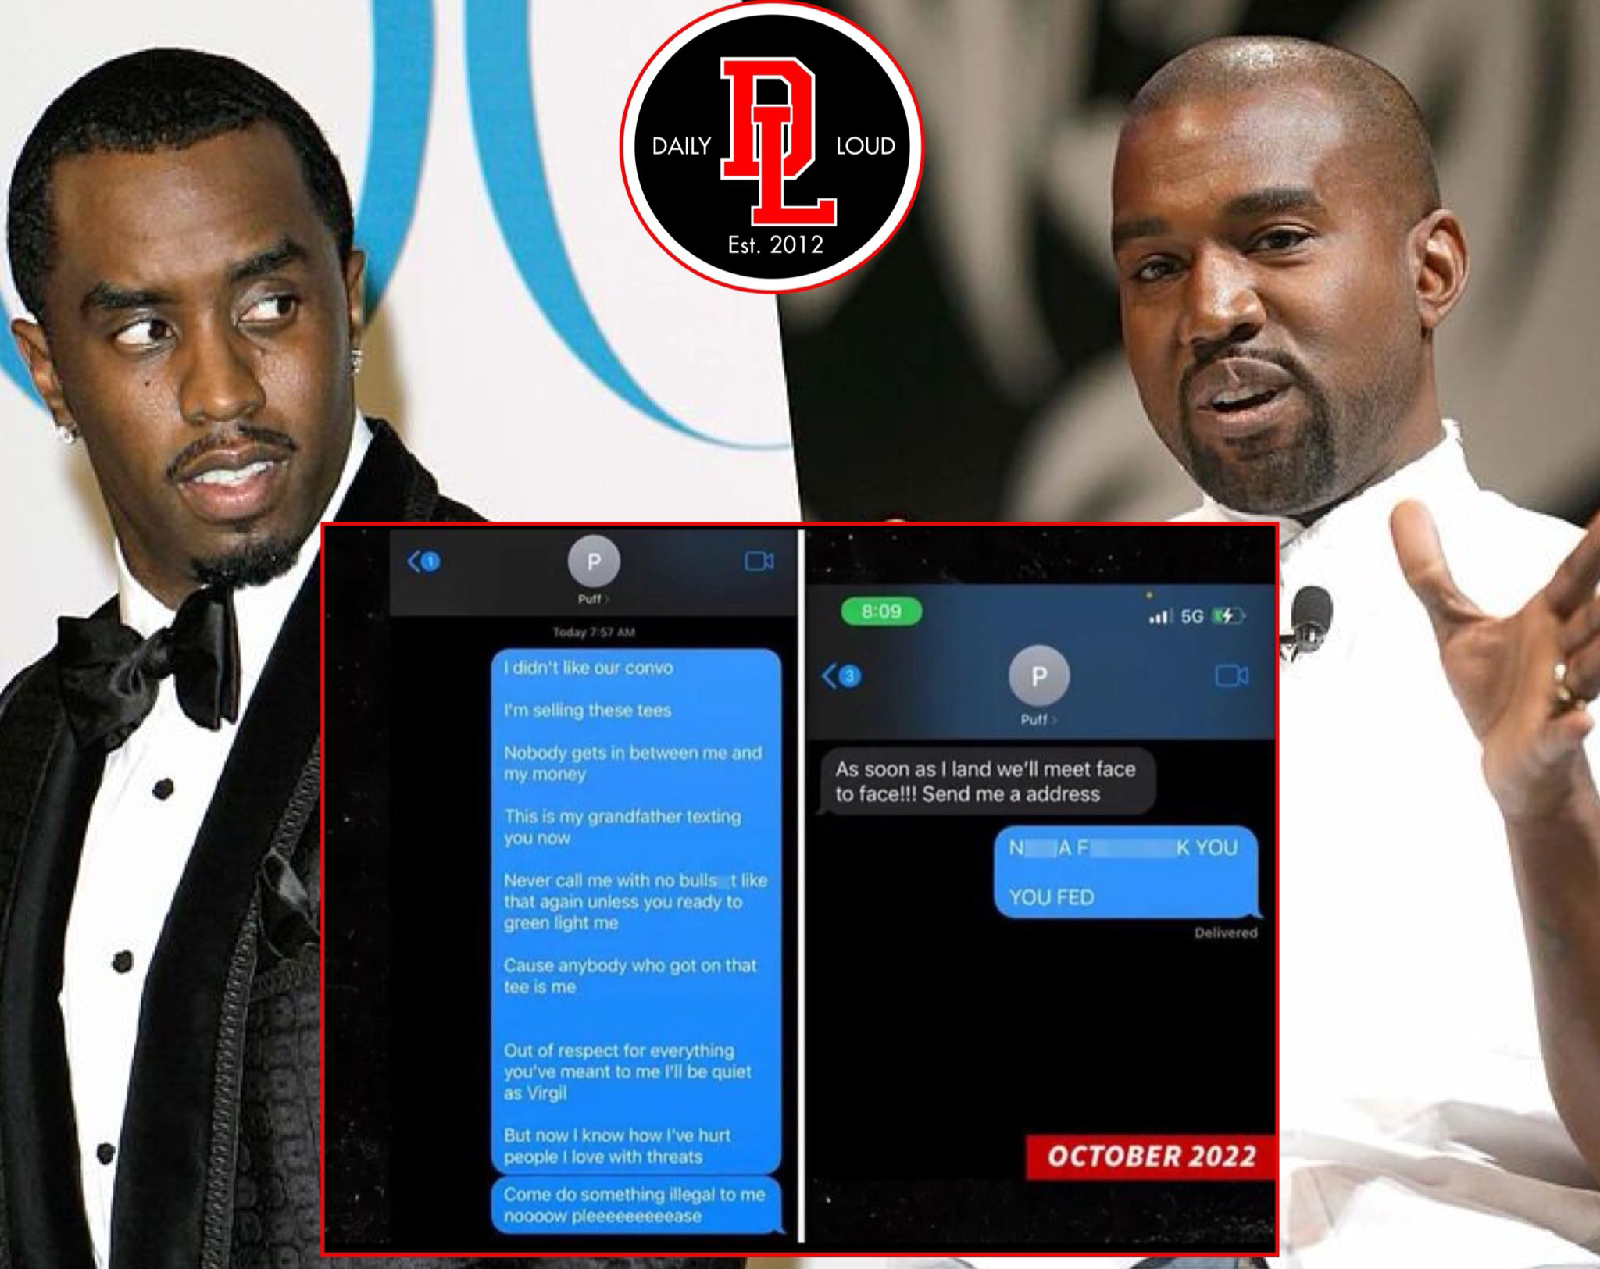 PHOTO Instagram DM screenshot shows Kanye West avoided meeting up